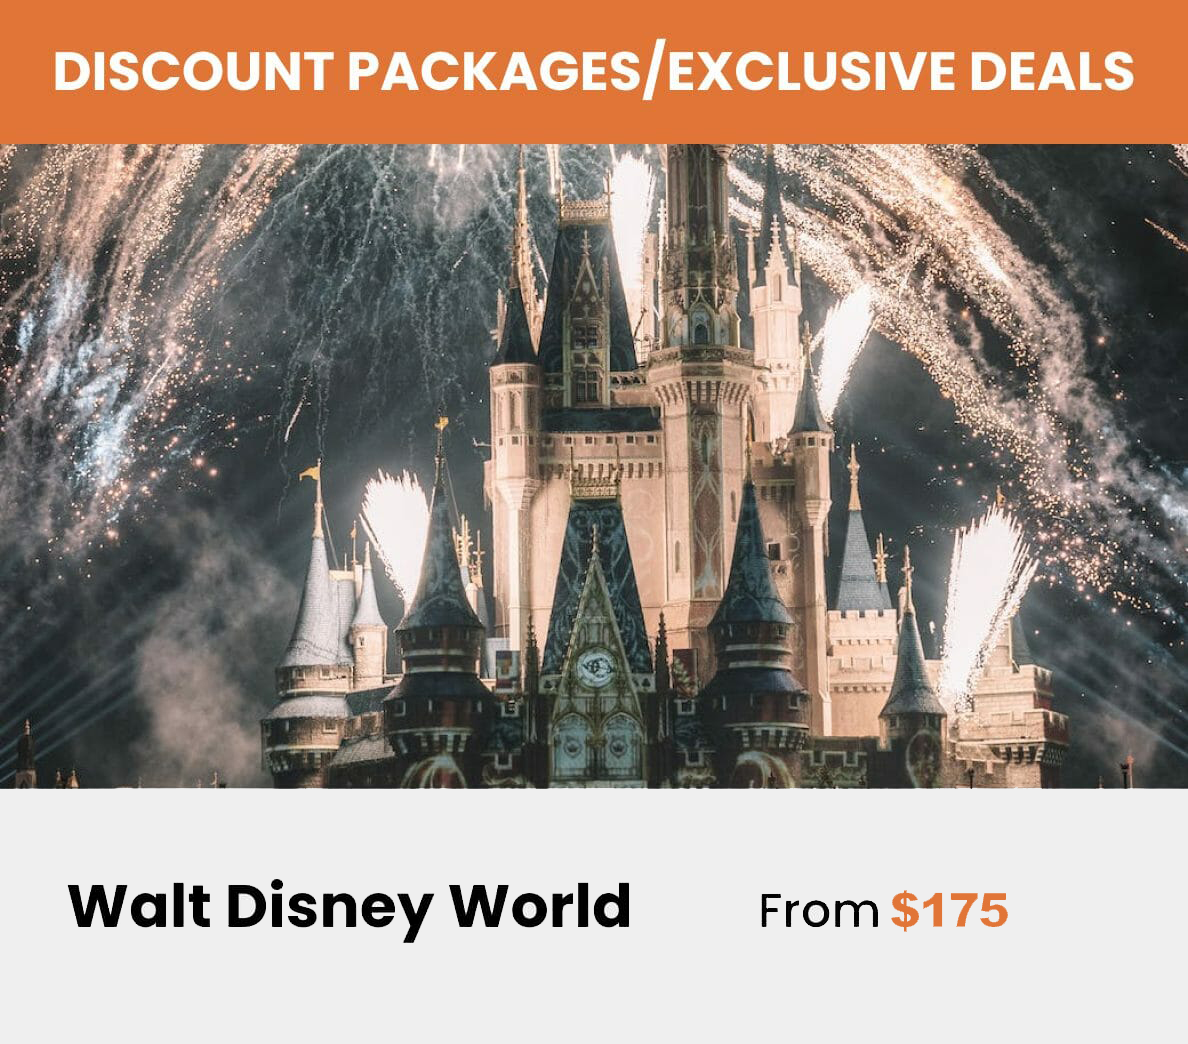 Walt Disney World Discount Package and Exclusive Deals Orlandovacation.com